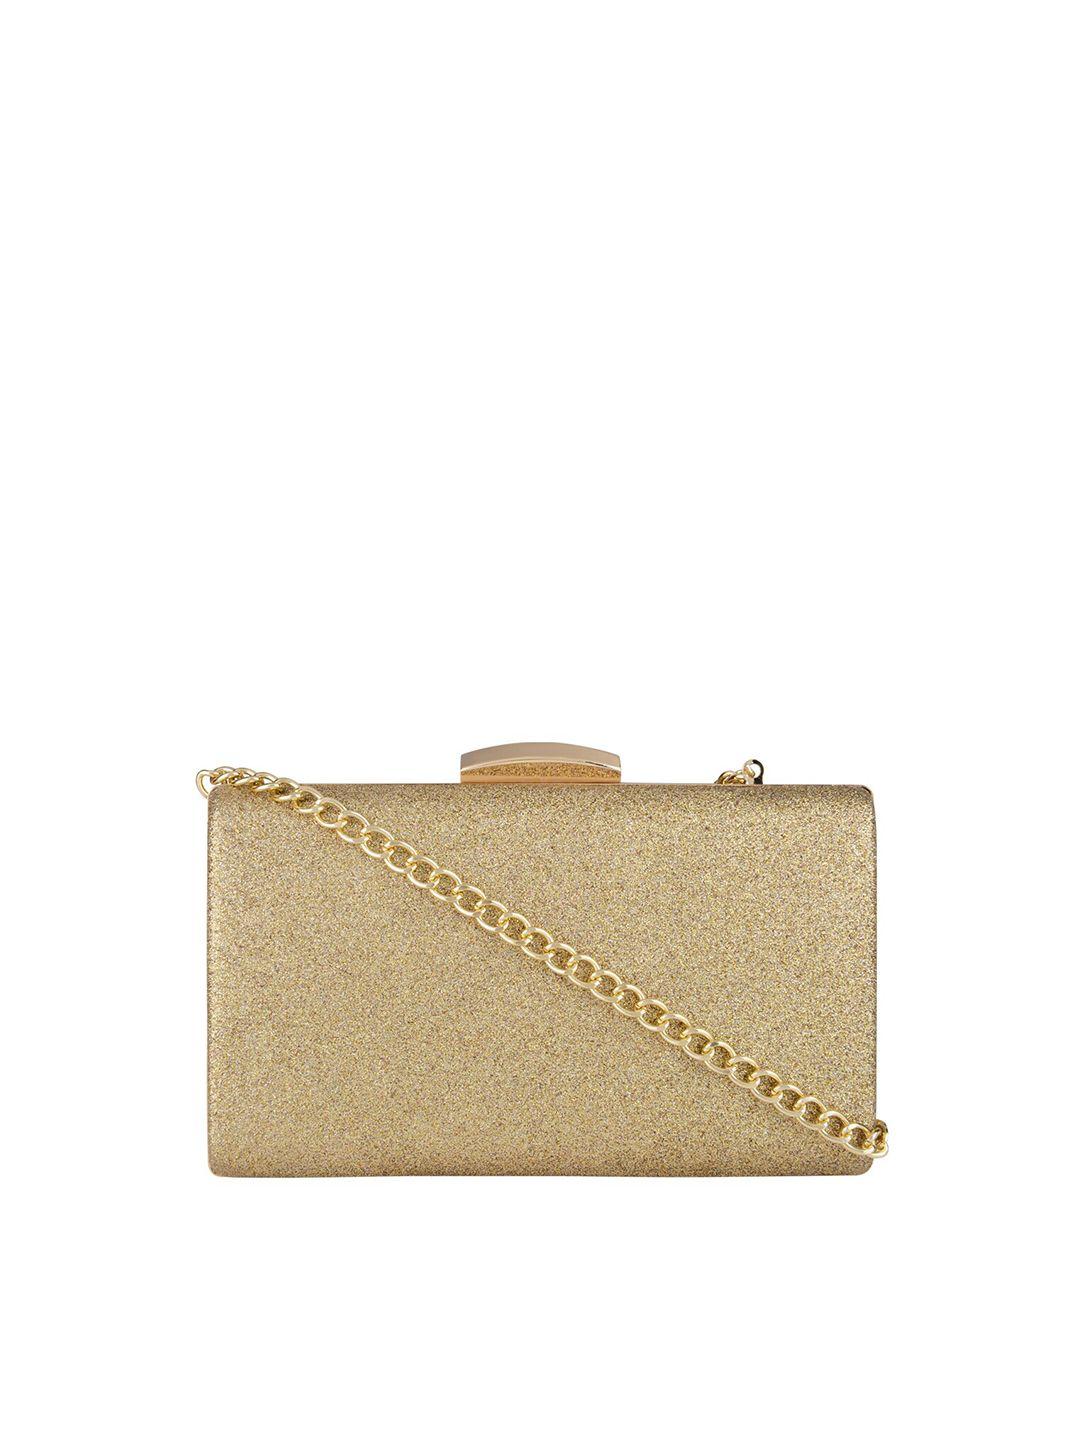 vdesi gold-toned embellished box clutch